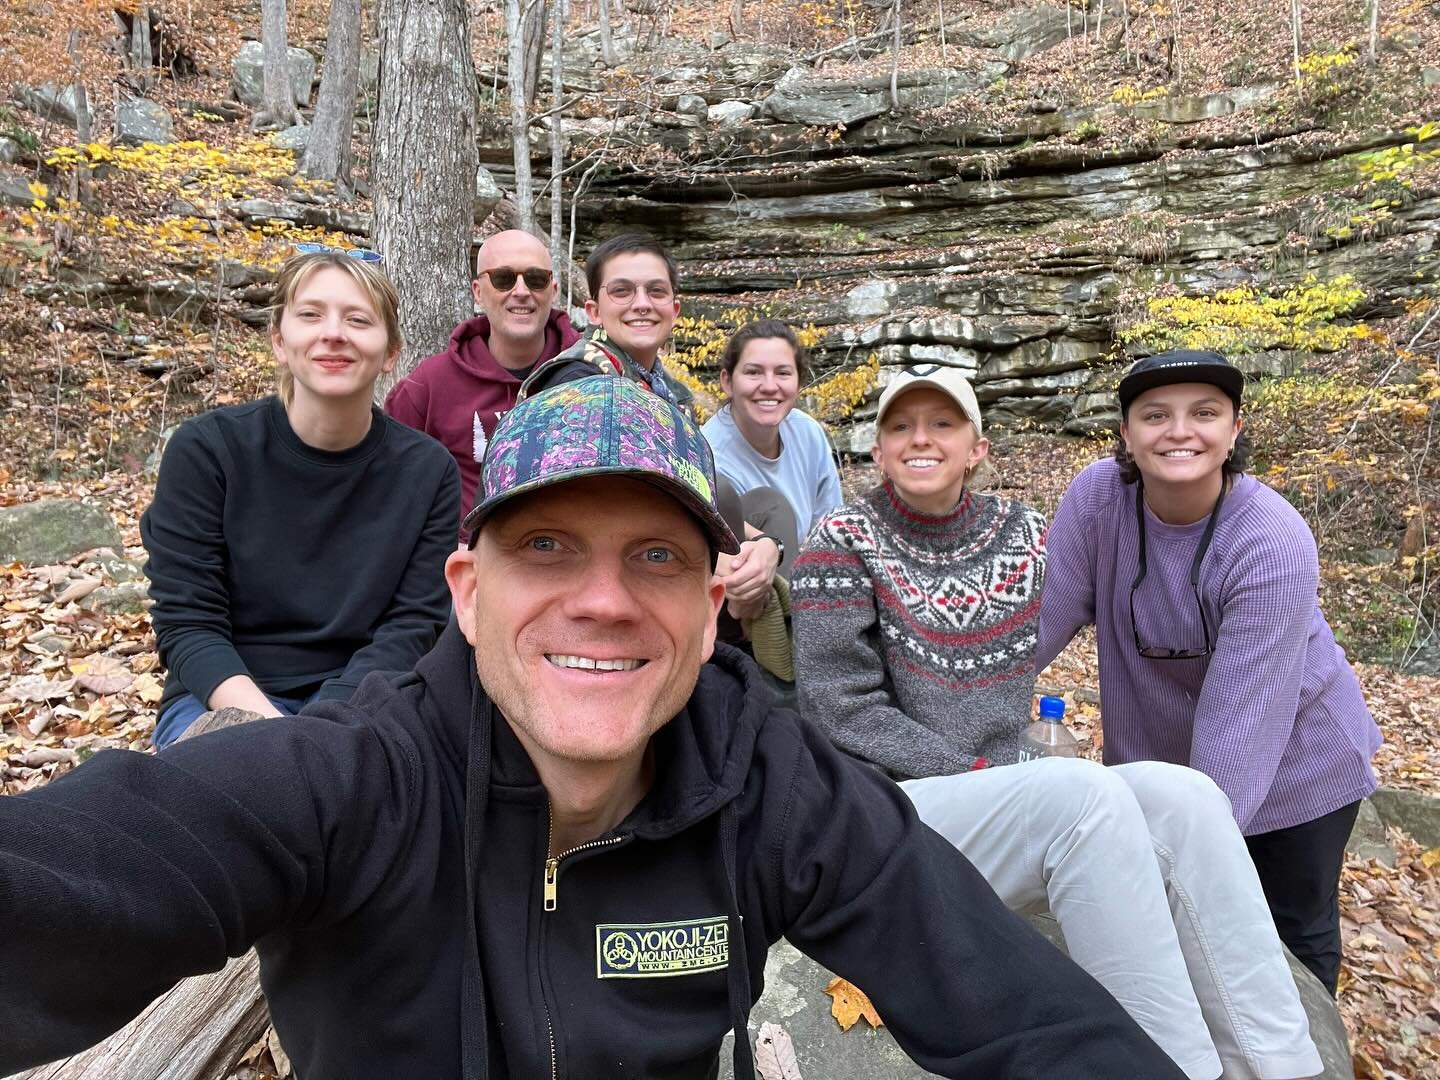 Posting from a recent Mindful Nashville Therapy team outing connecting with nature. Wishing you all connection to self and presence in whatever arises through this holiday season&mdash;the pleasant, the unpleasant, may we welcome it all together as b